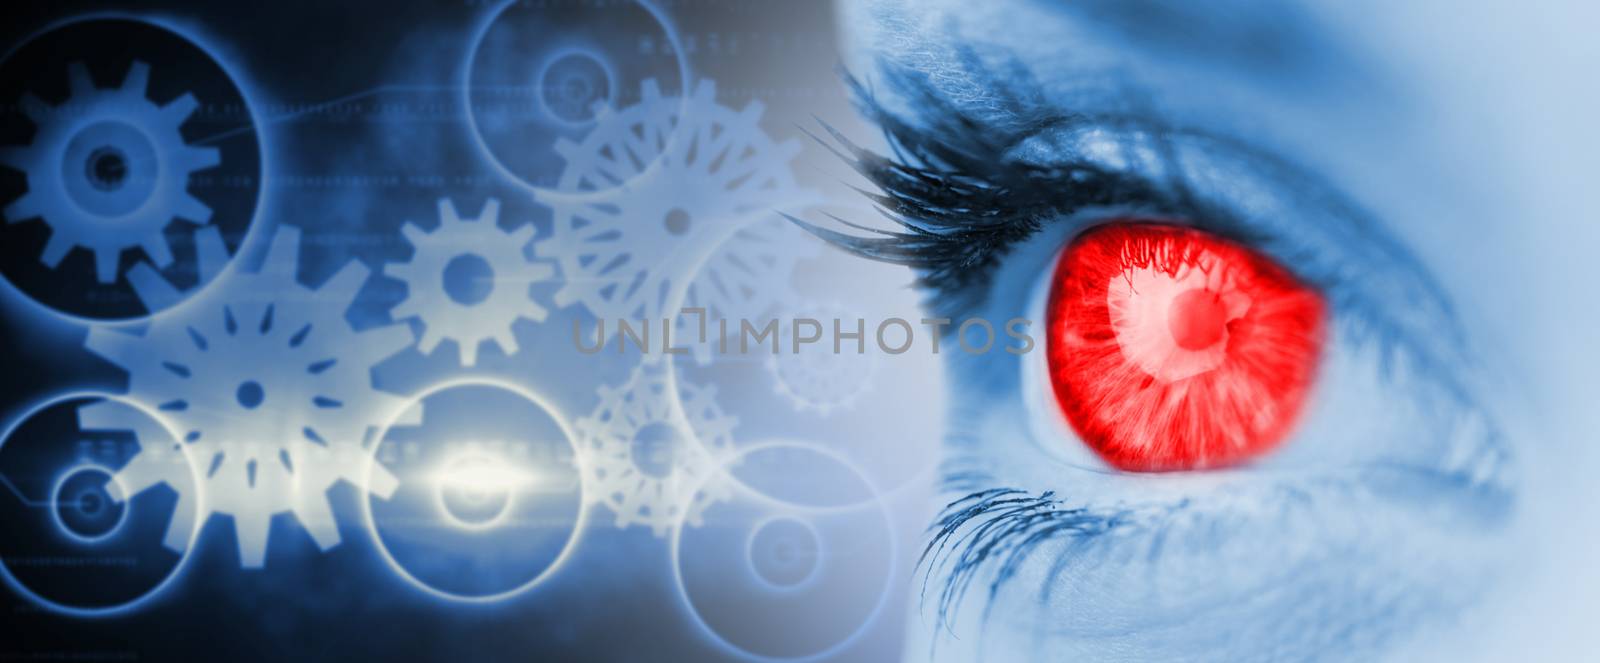 Red eye on blue face against blue and black cogs and wheels